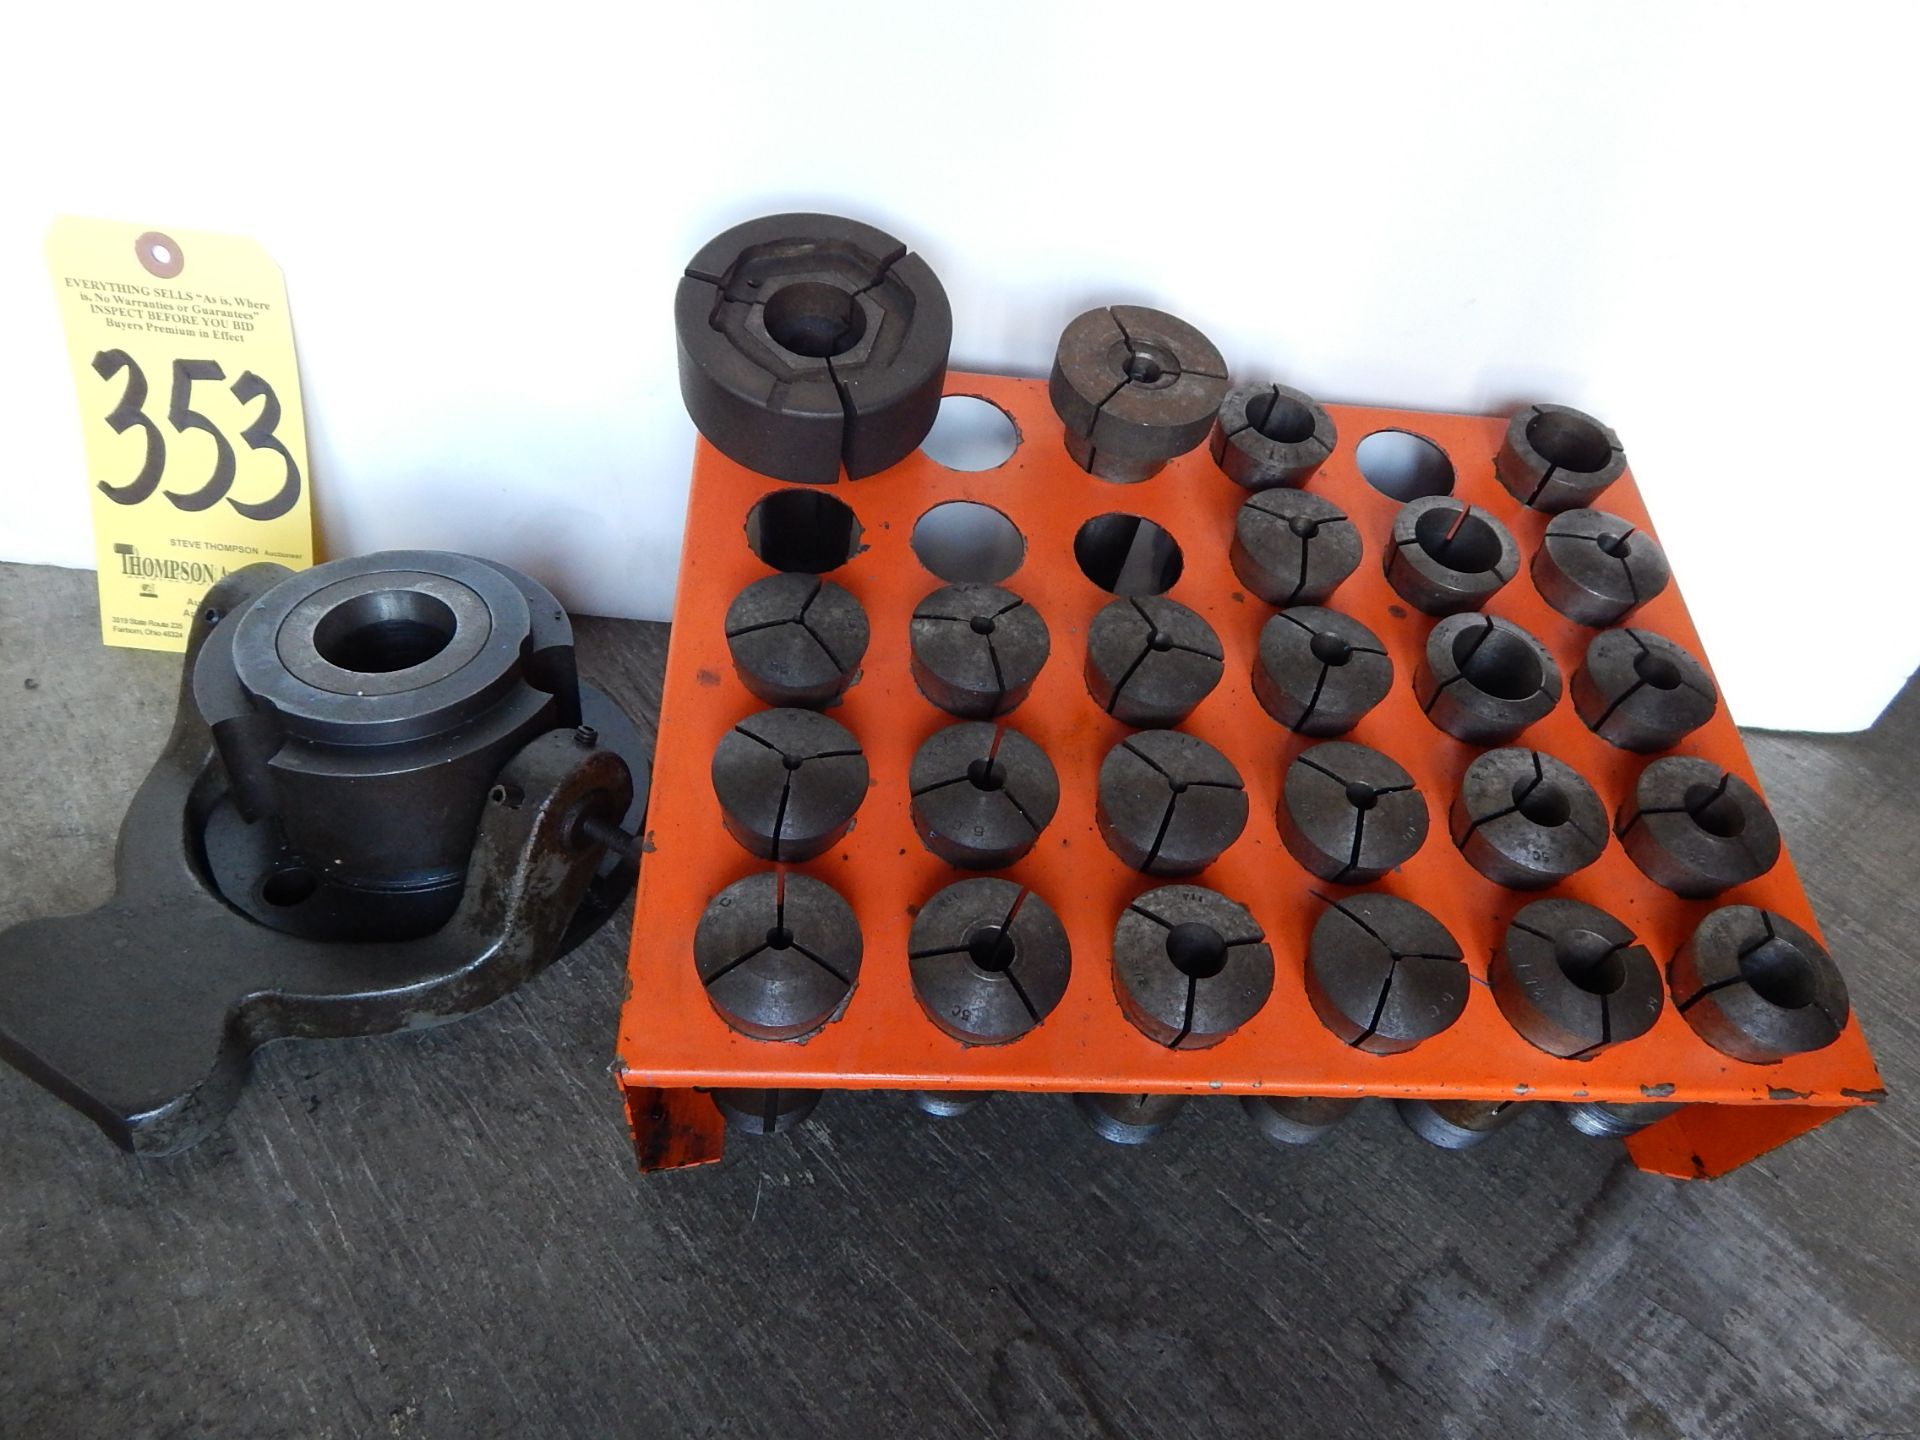 5C Collet Fixture with 5C Collets and Rack